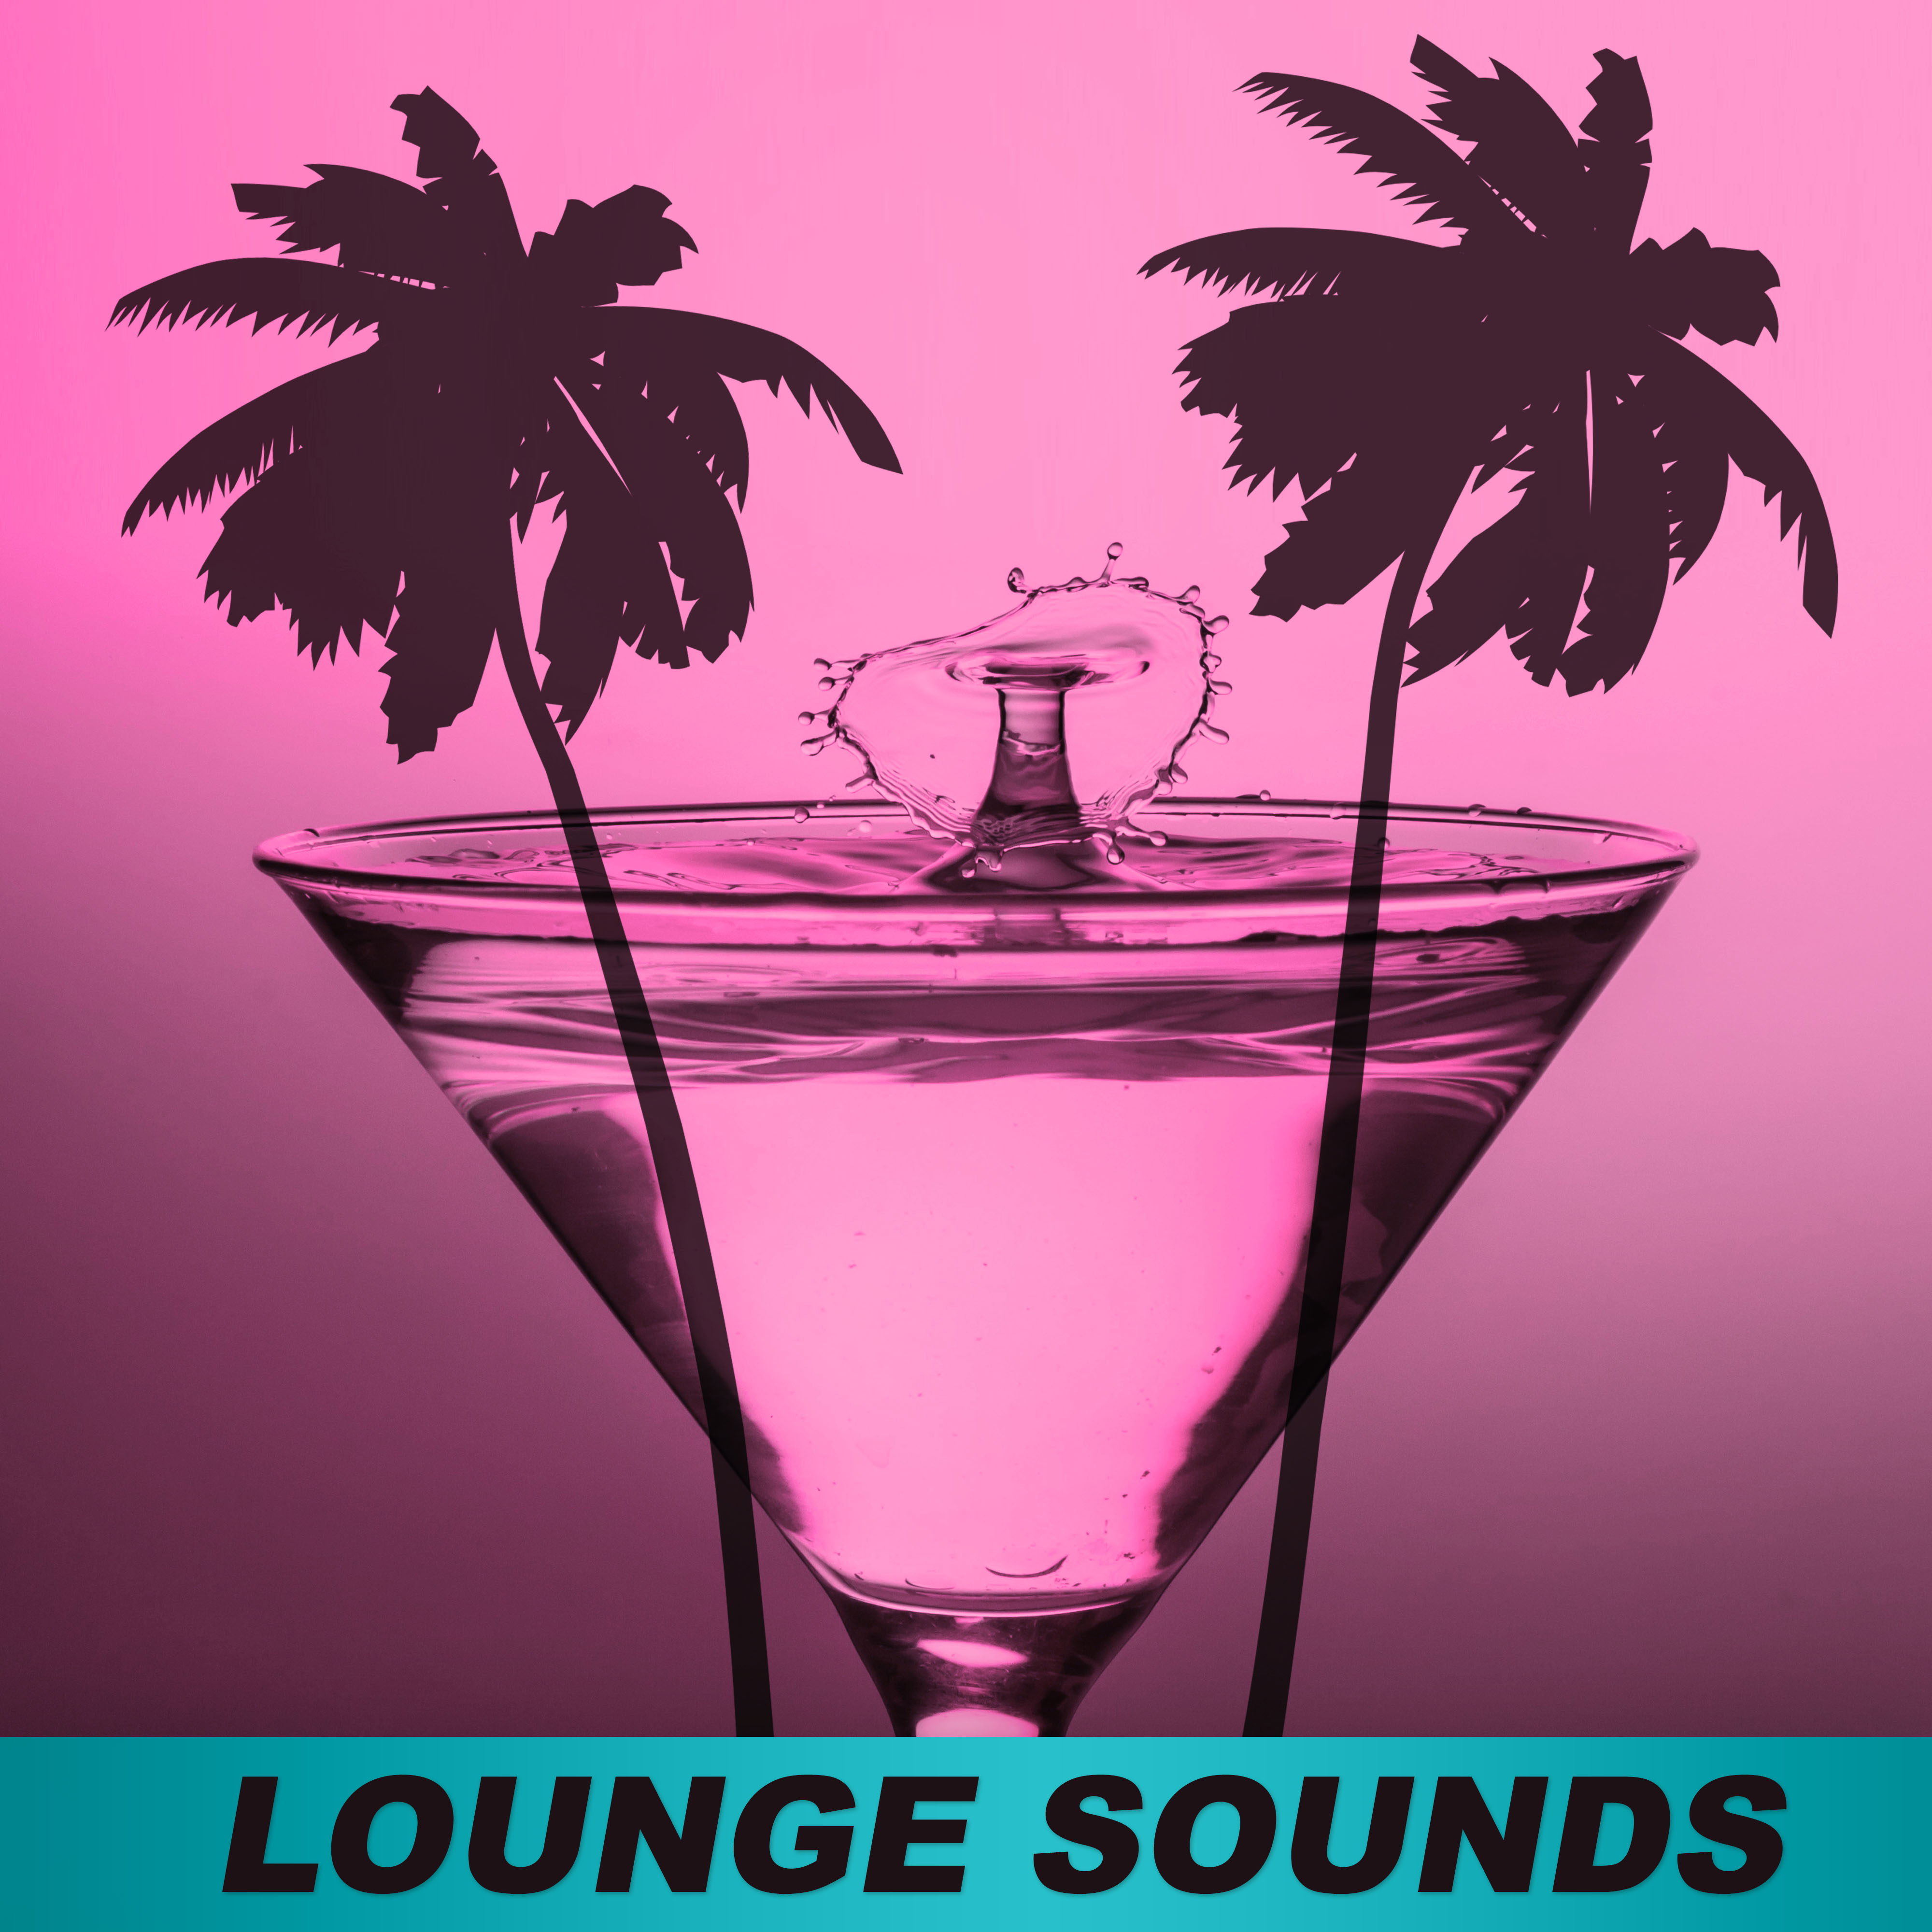 Lounge Sounds – Lounge Music, Chill Out Sounds for Relax & Rest